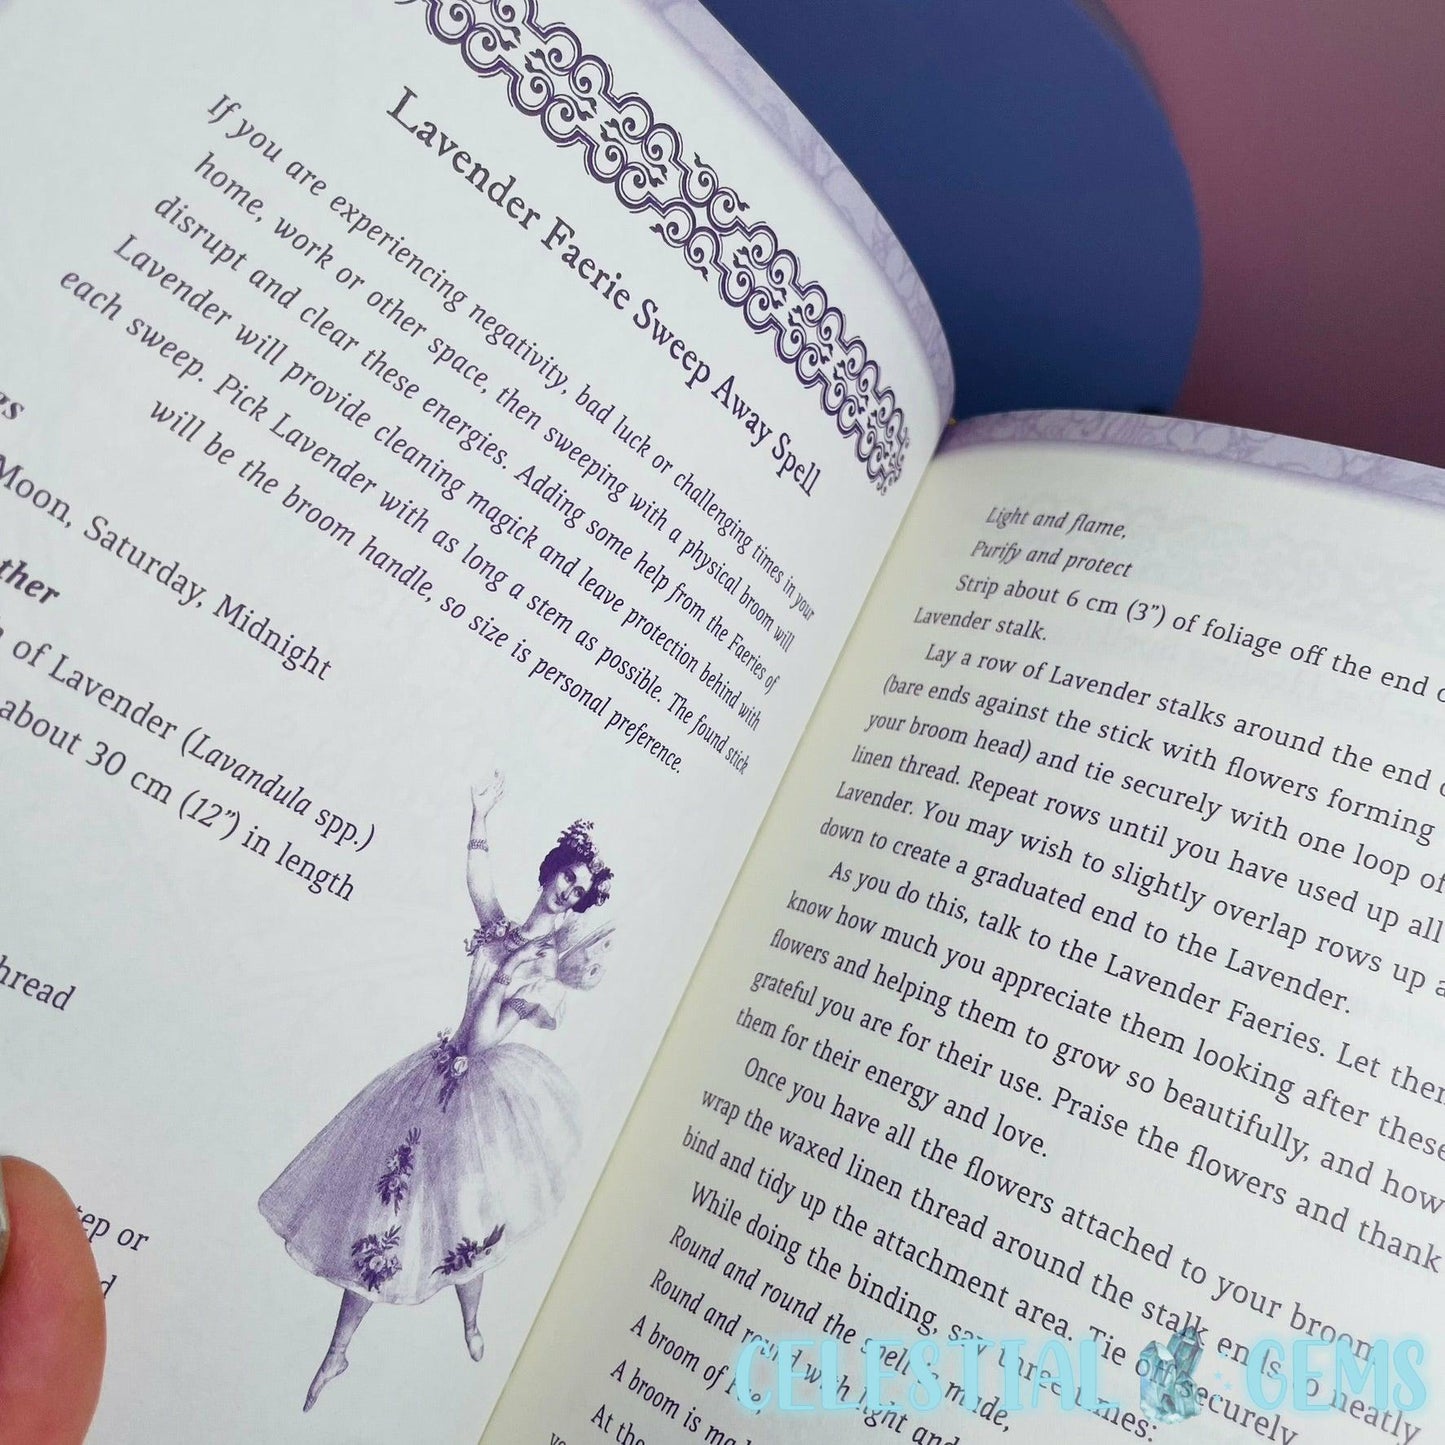 The Book of Faerie Spells by Cheralyn Darcey